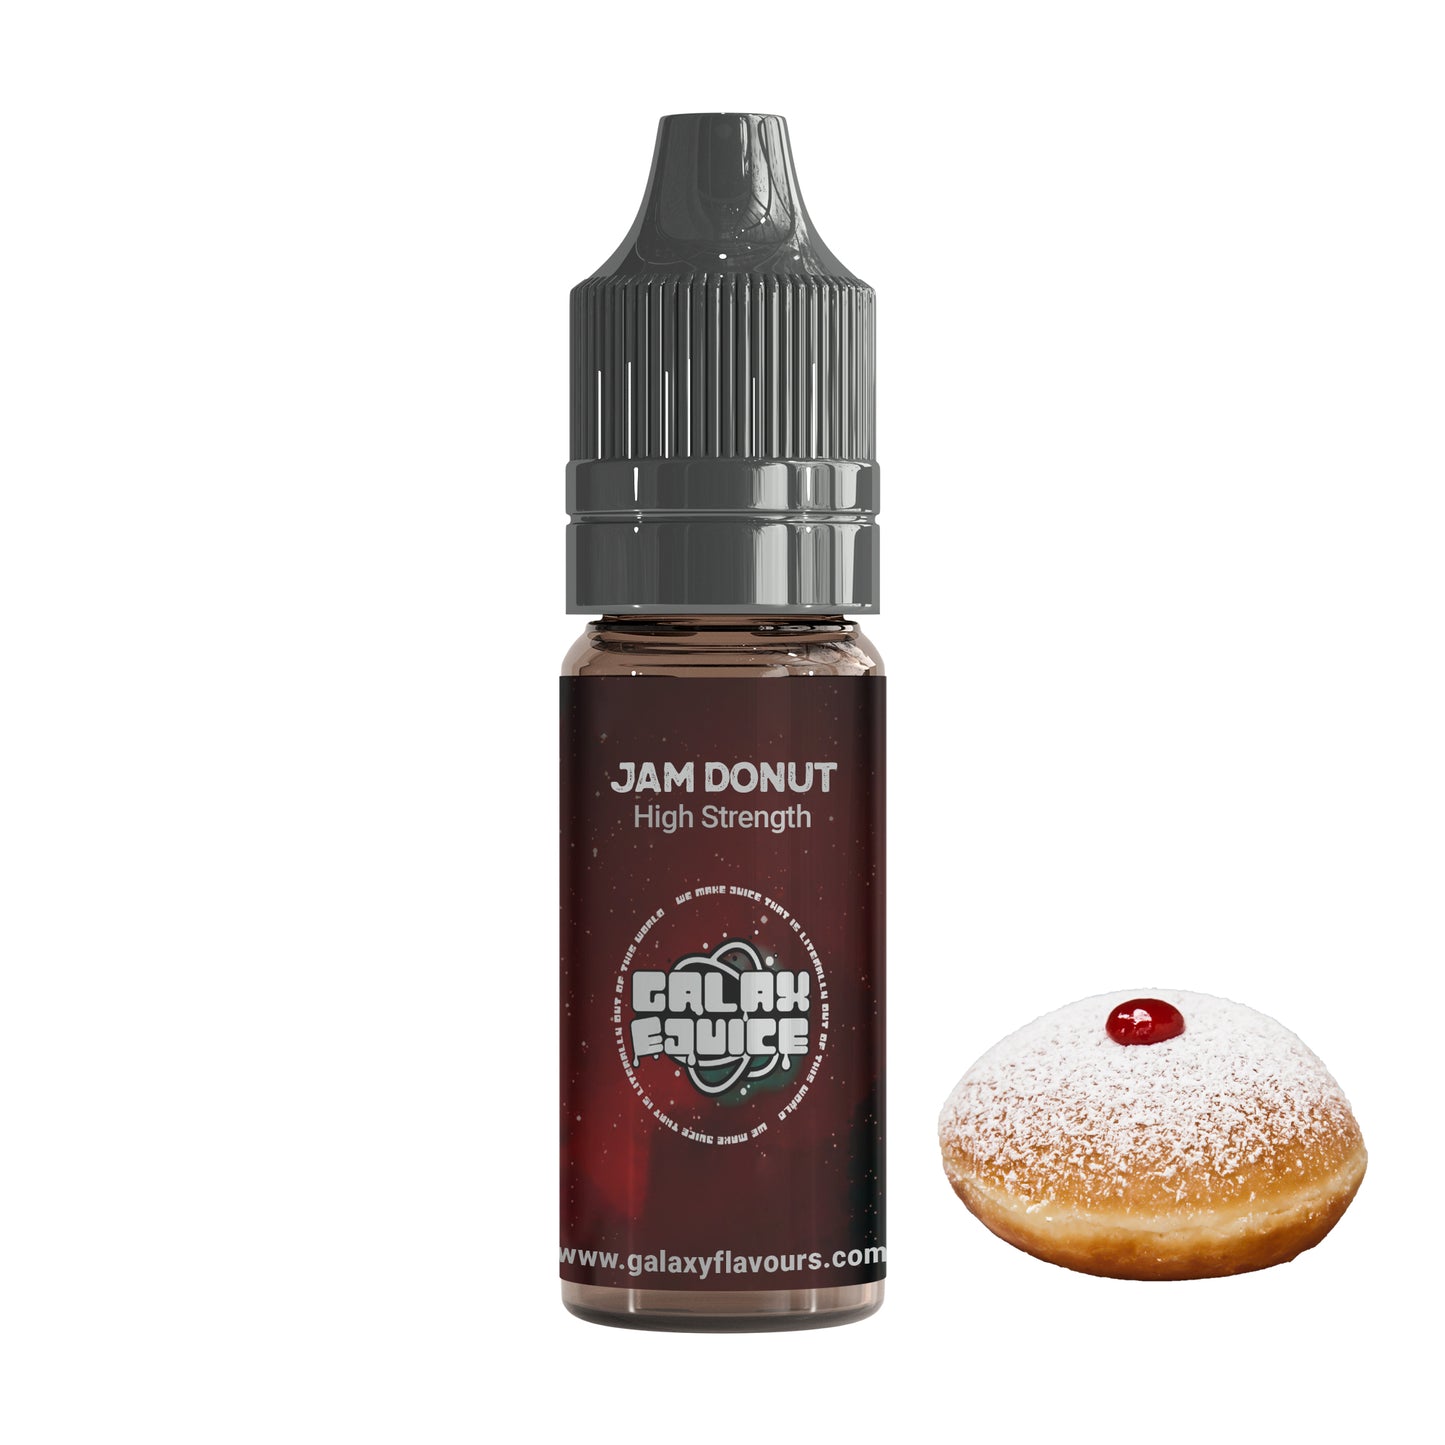 Jam Donut High Strength Professional Flavouring.